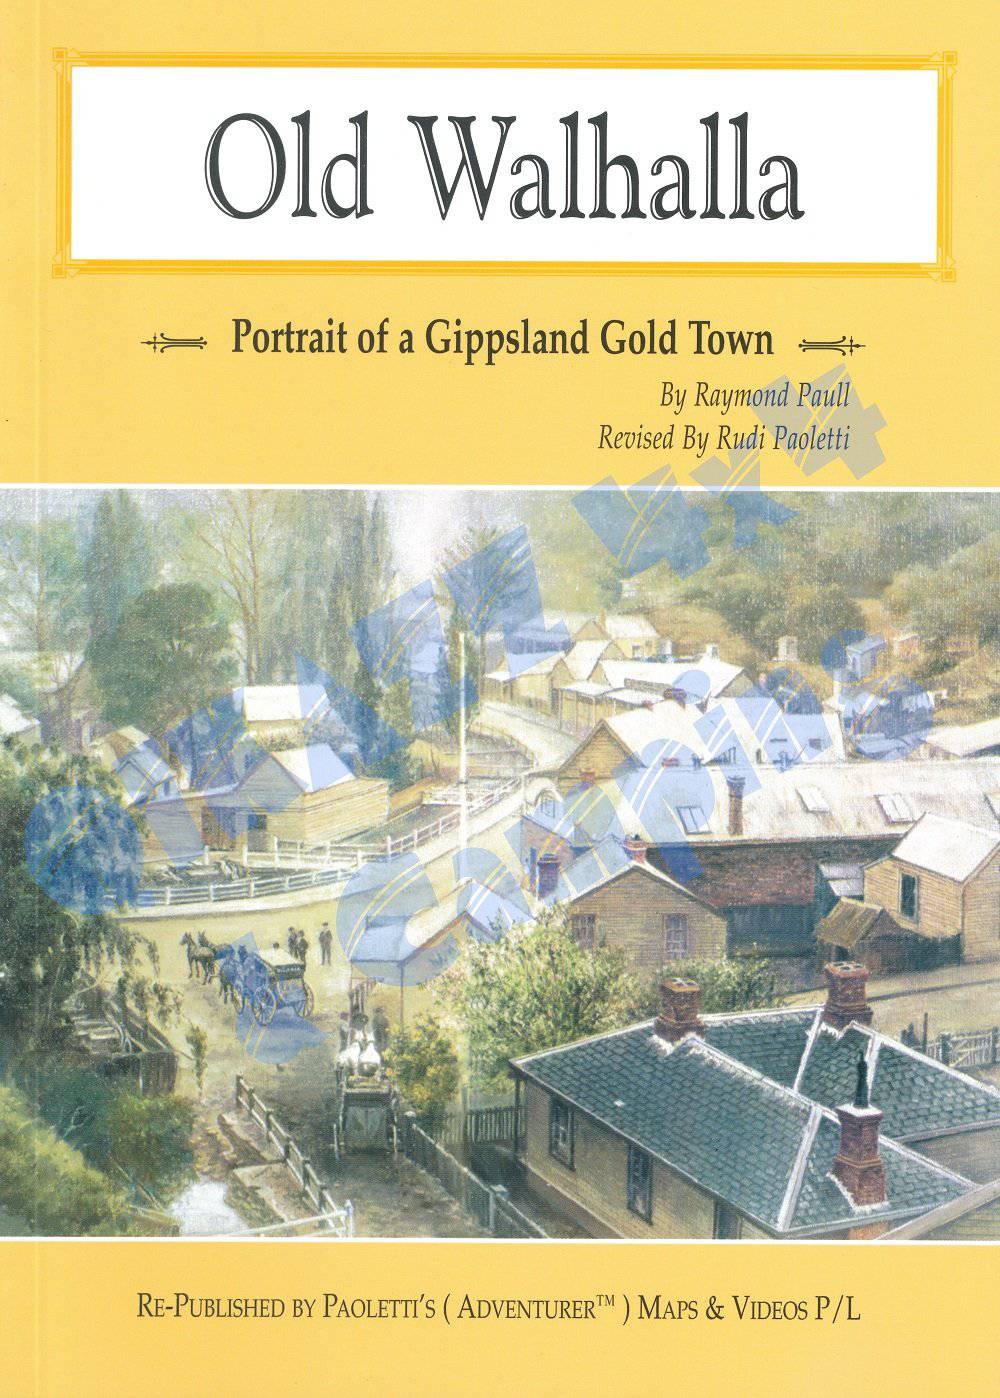 Old Walhalla- by Raymond Paull - Soft Cover | Adventurer Maps